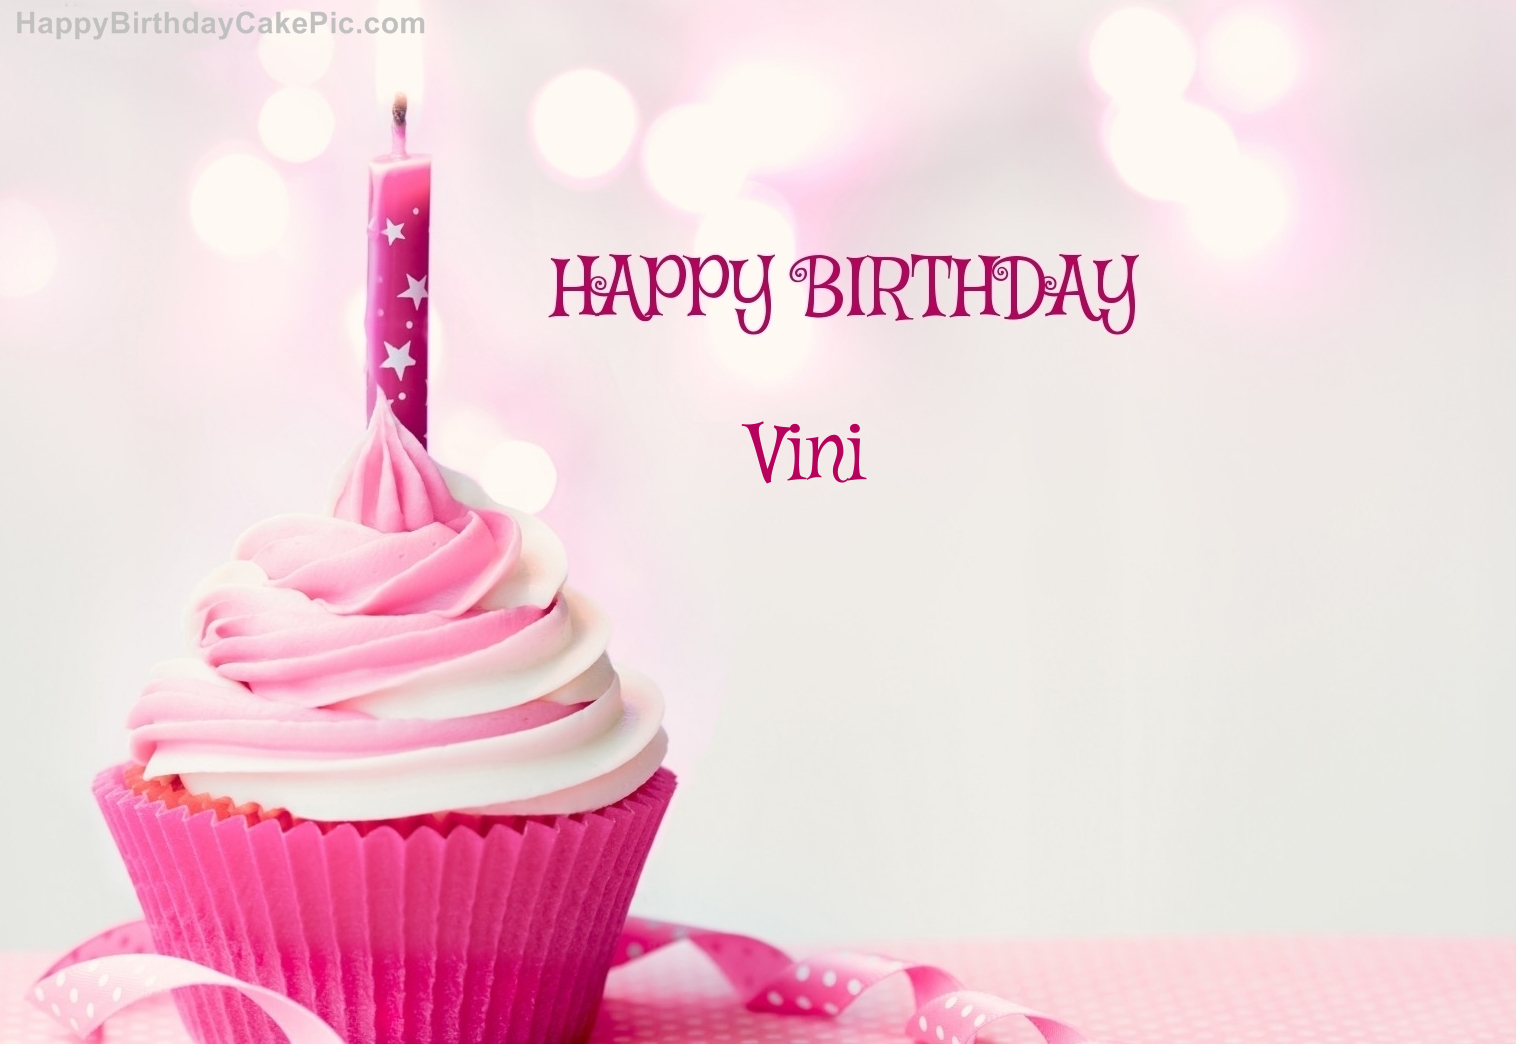 Happy Birthday Cupcake Candle Pink Cake For Vini